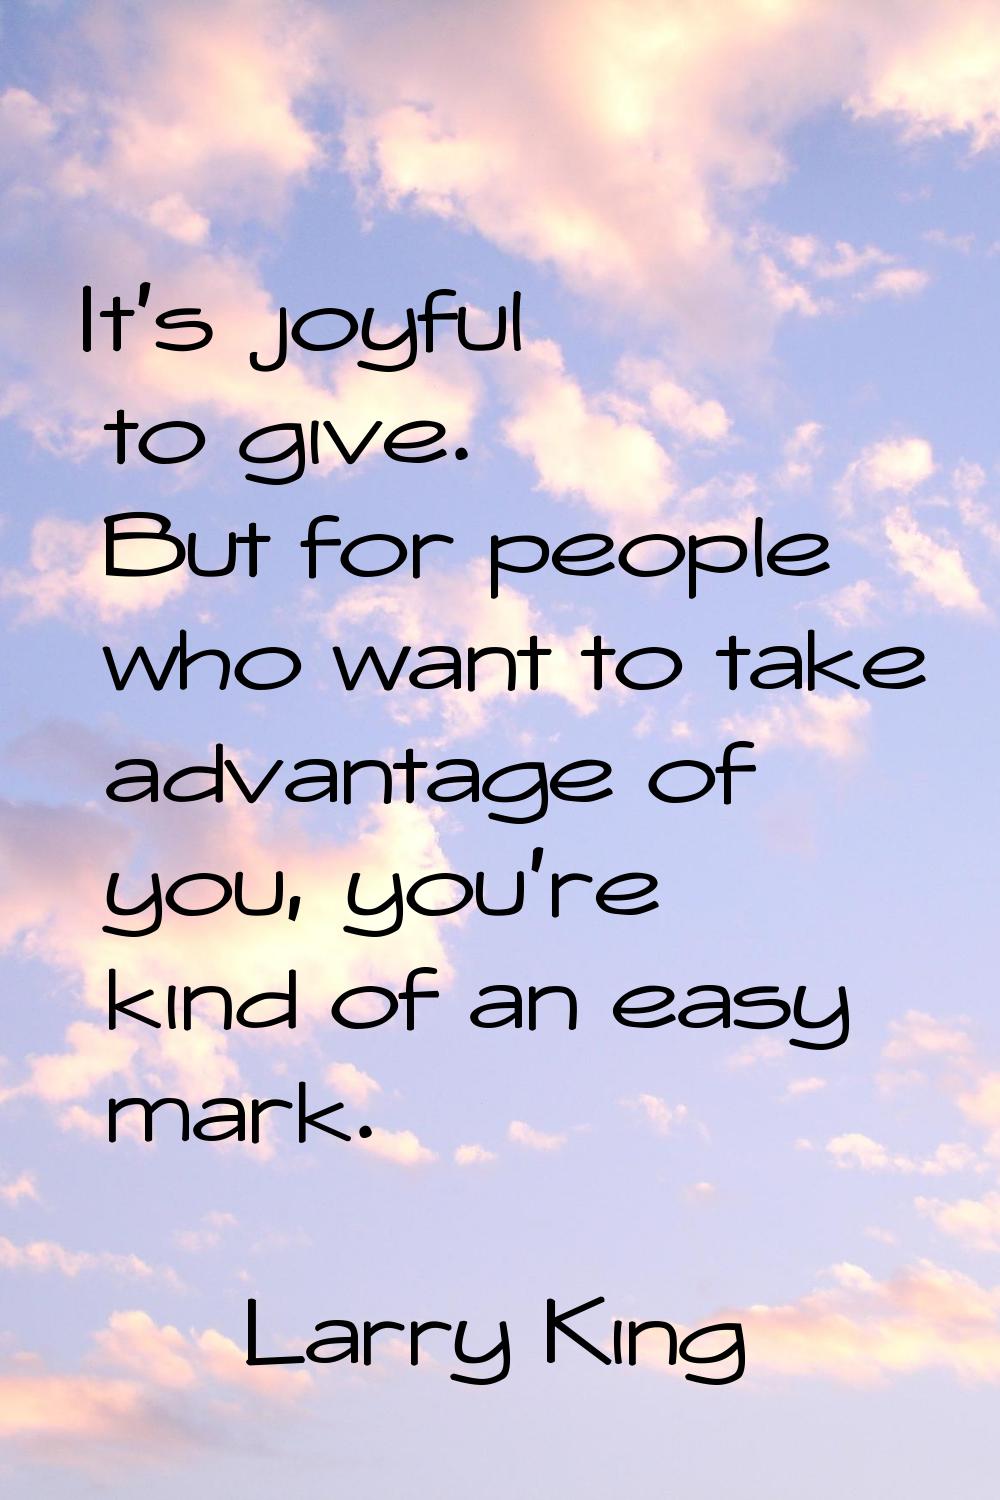 It's joyful to give. But for people who want to take advantage of you, you're kind of an easy mark.